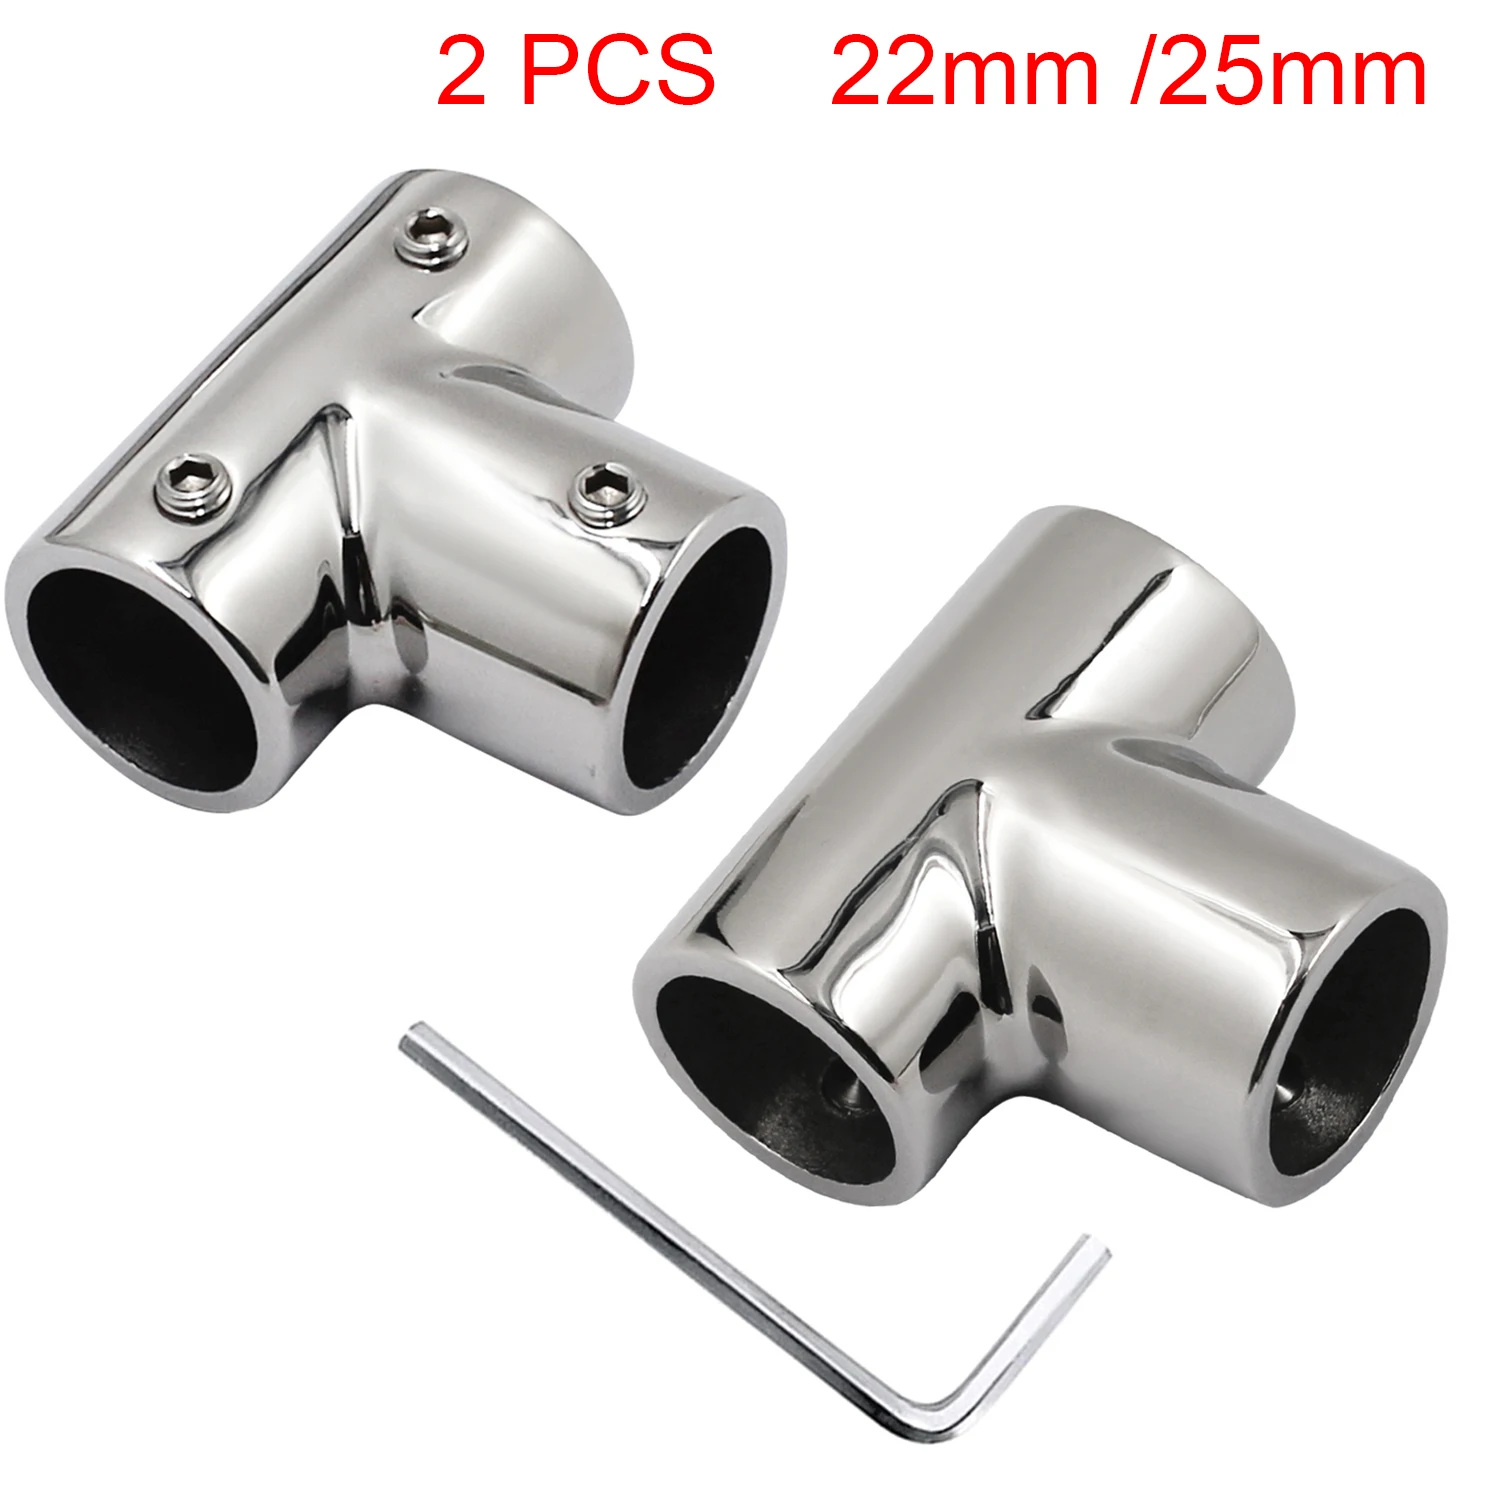 2 Pcs Stainless Steel 316 Marine Boat 3 Way Handrail Fitting 90° Deck Hand Rail Tee Joint Connector for 22mm/25mm Tube/Pipe 2 pcs 22mm 25mm 90 degree stainless steel 316 boat handrail fitting stanchion handle railing marine hardware